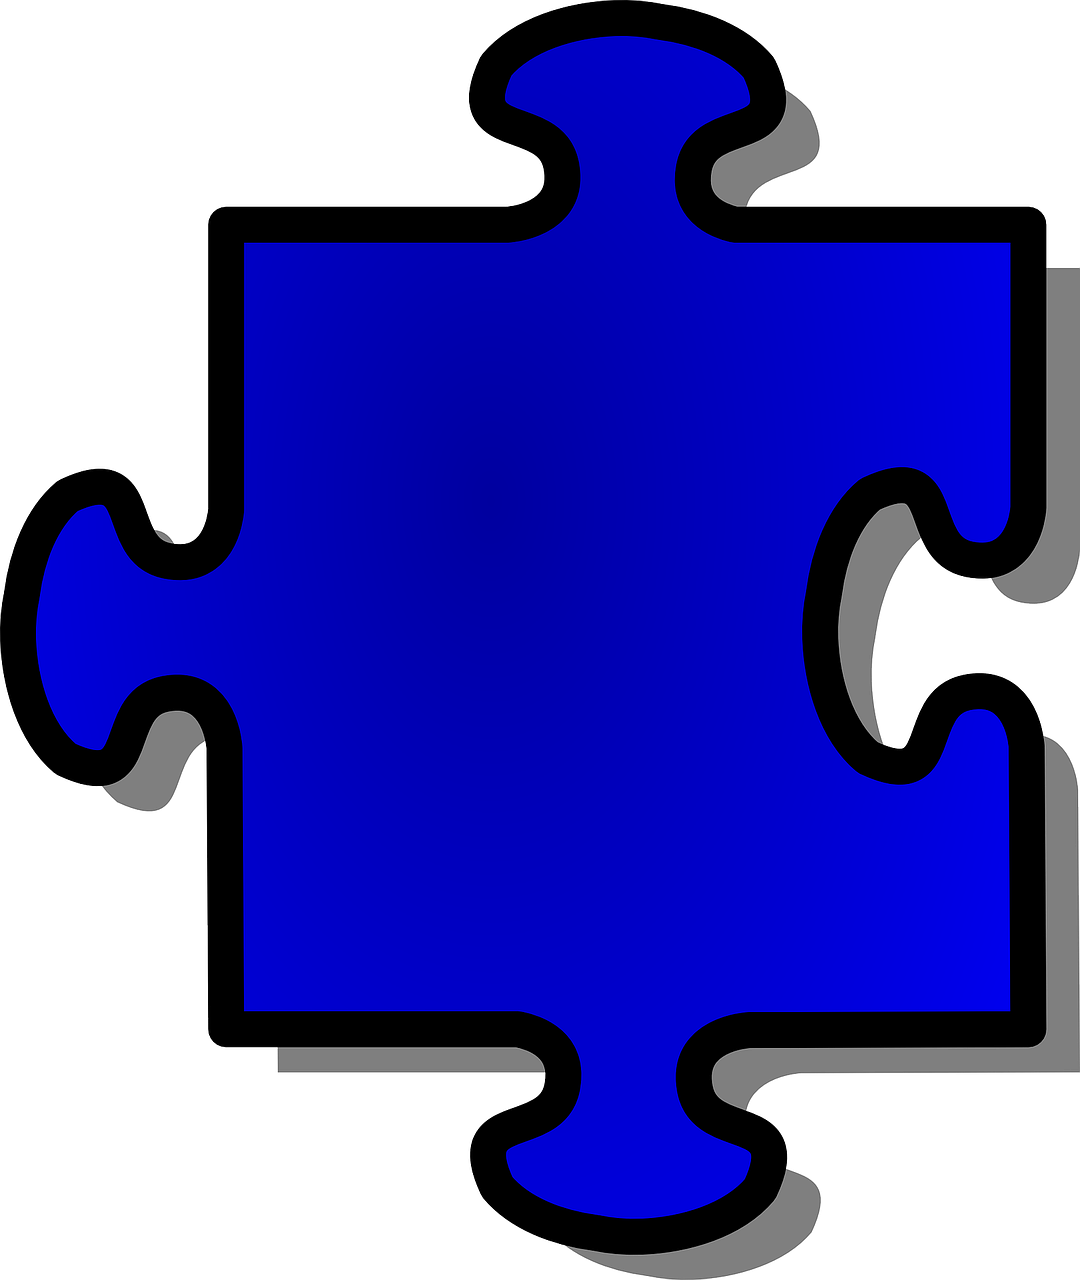 jigsaw,puzzle,piece,single,game,blue,join,solve,solution,fit,match,free vector graphics,free pictures, free photos, free images, royalty free, free illustrations, public domain